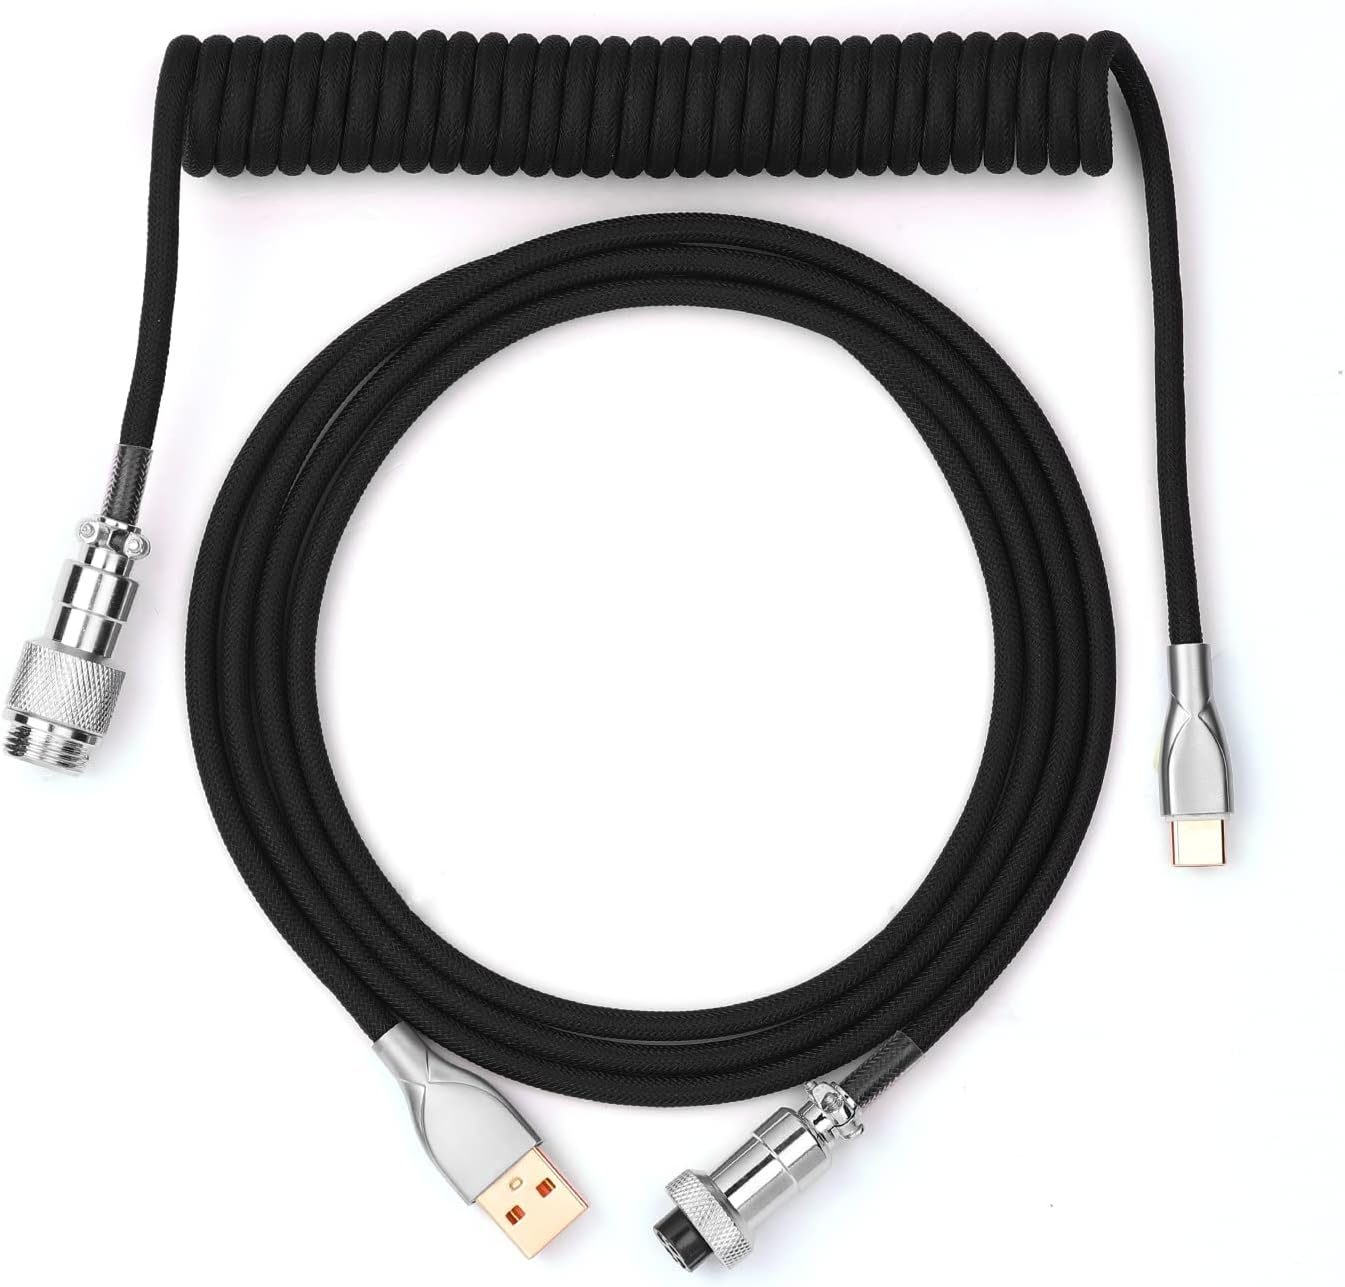 Coiled Cable for Mechanical keyboards